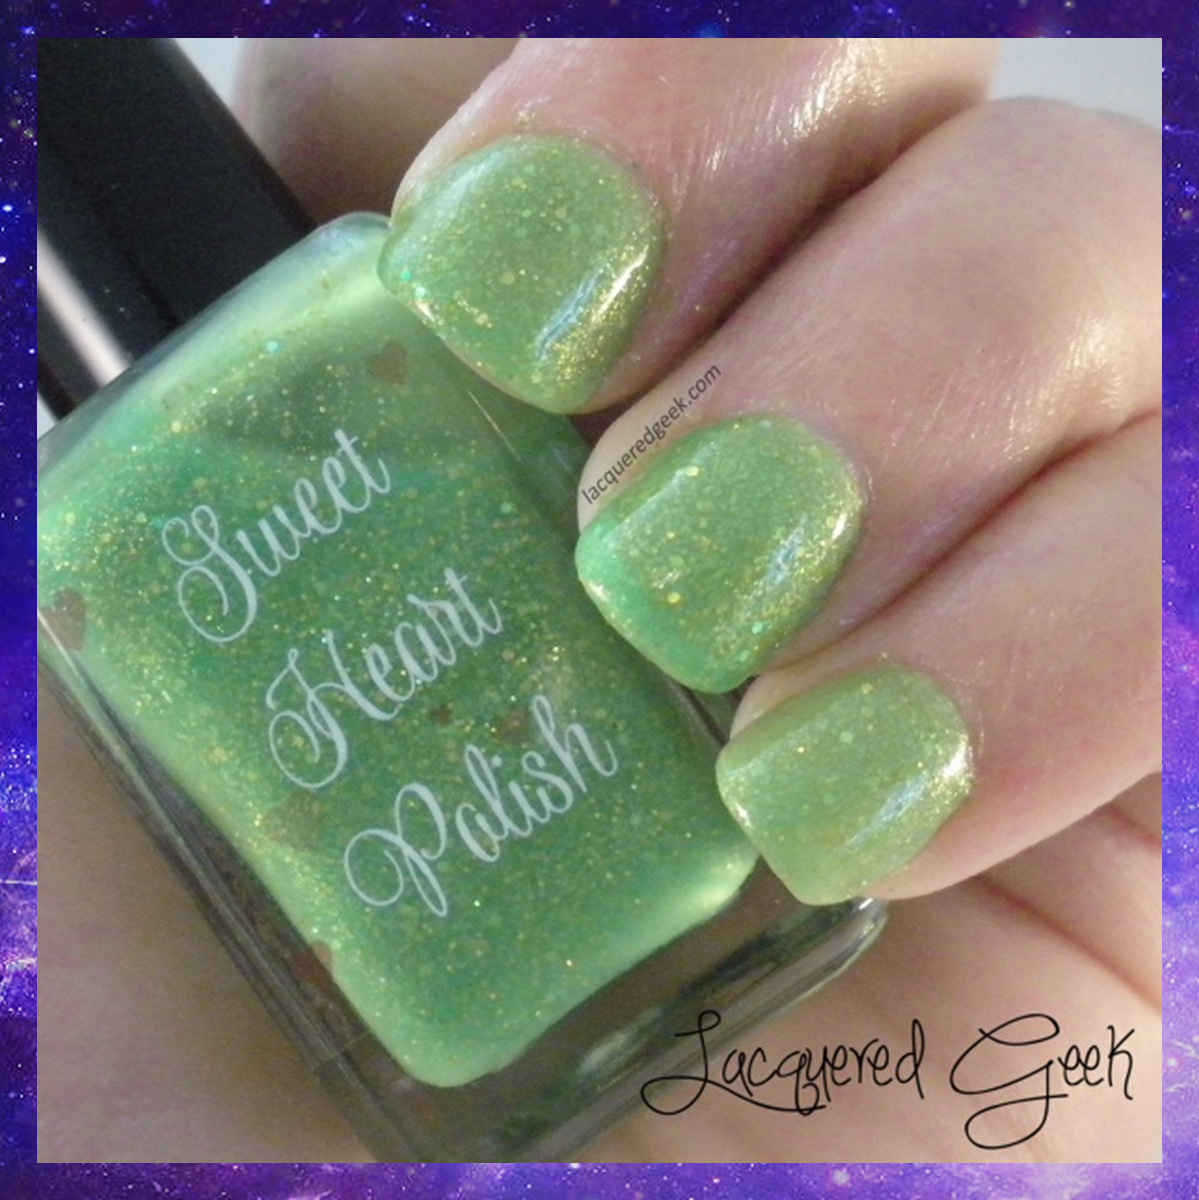 the ladies of peter pan duo sweet heart polish oh look, a firefly